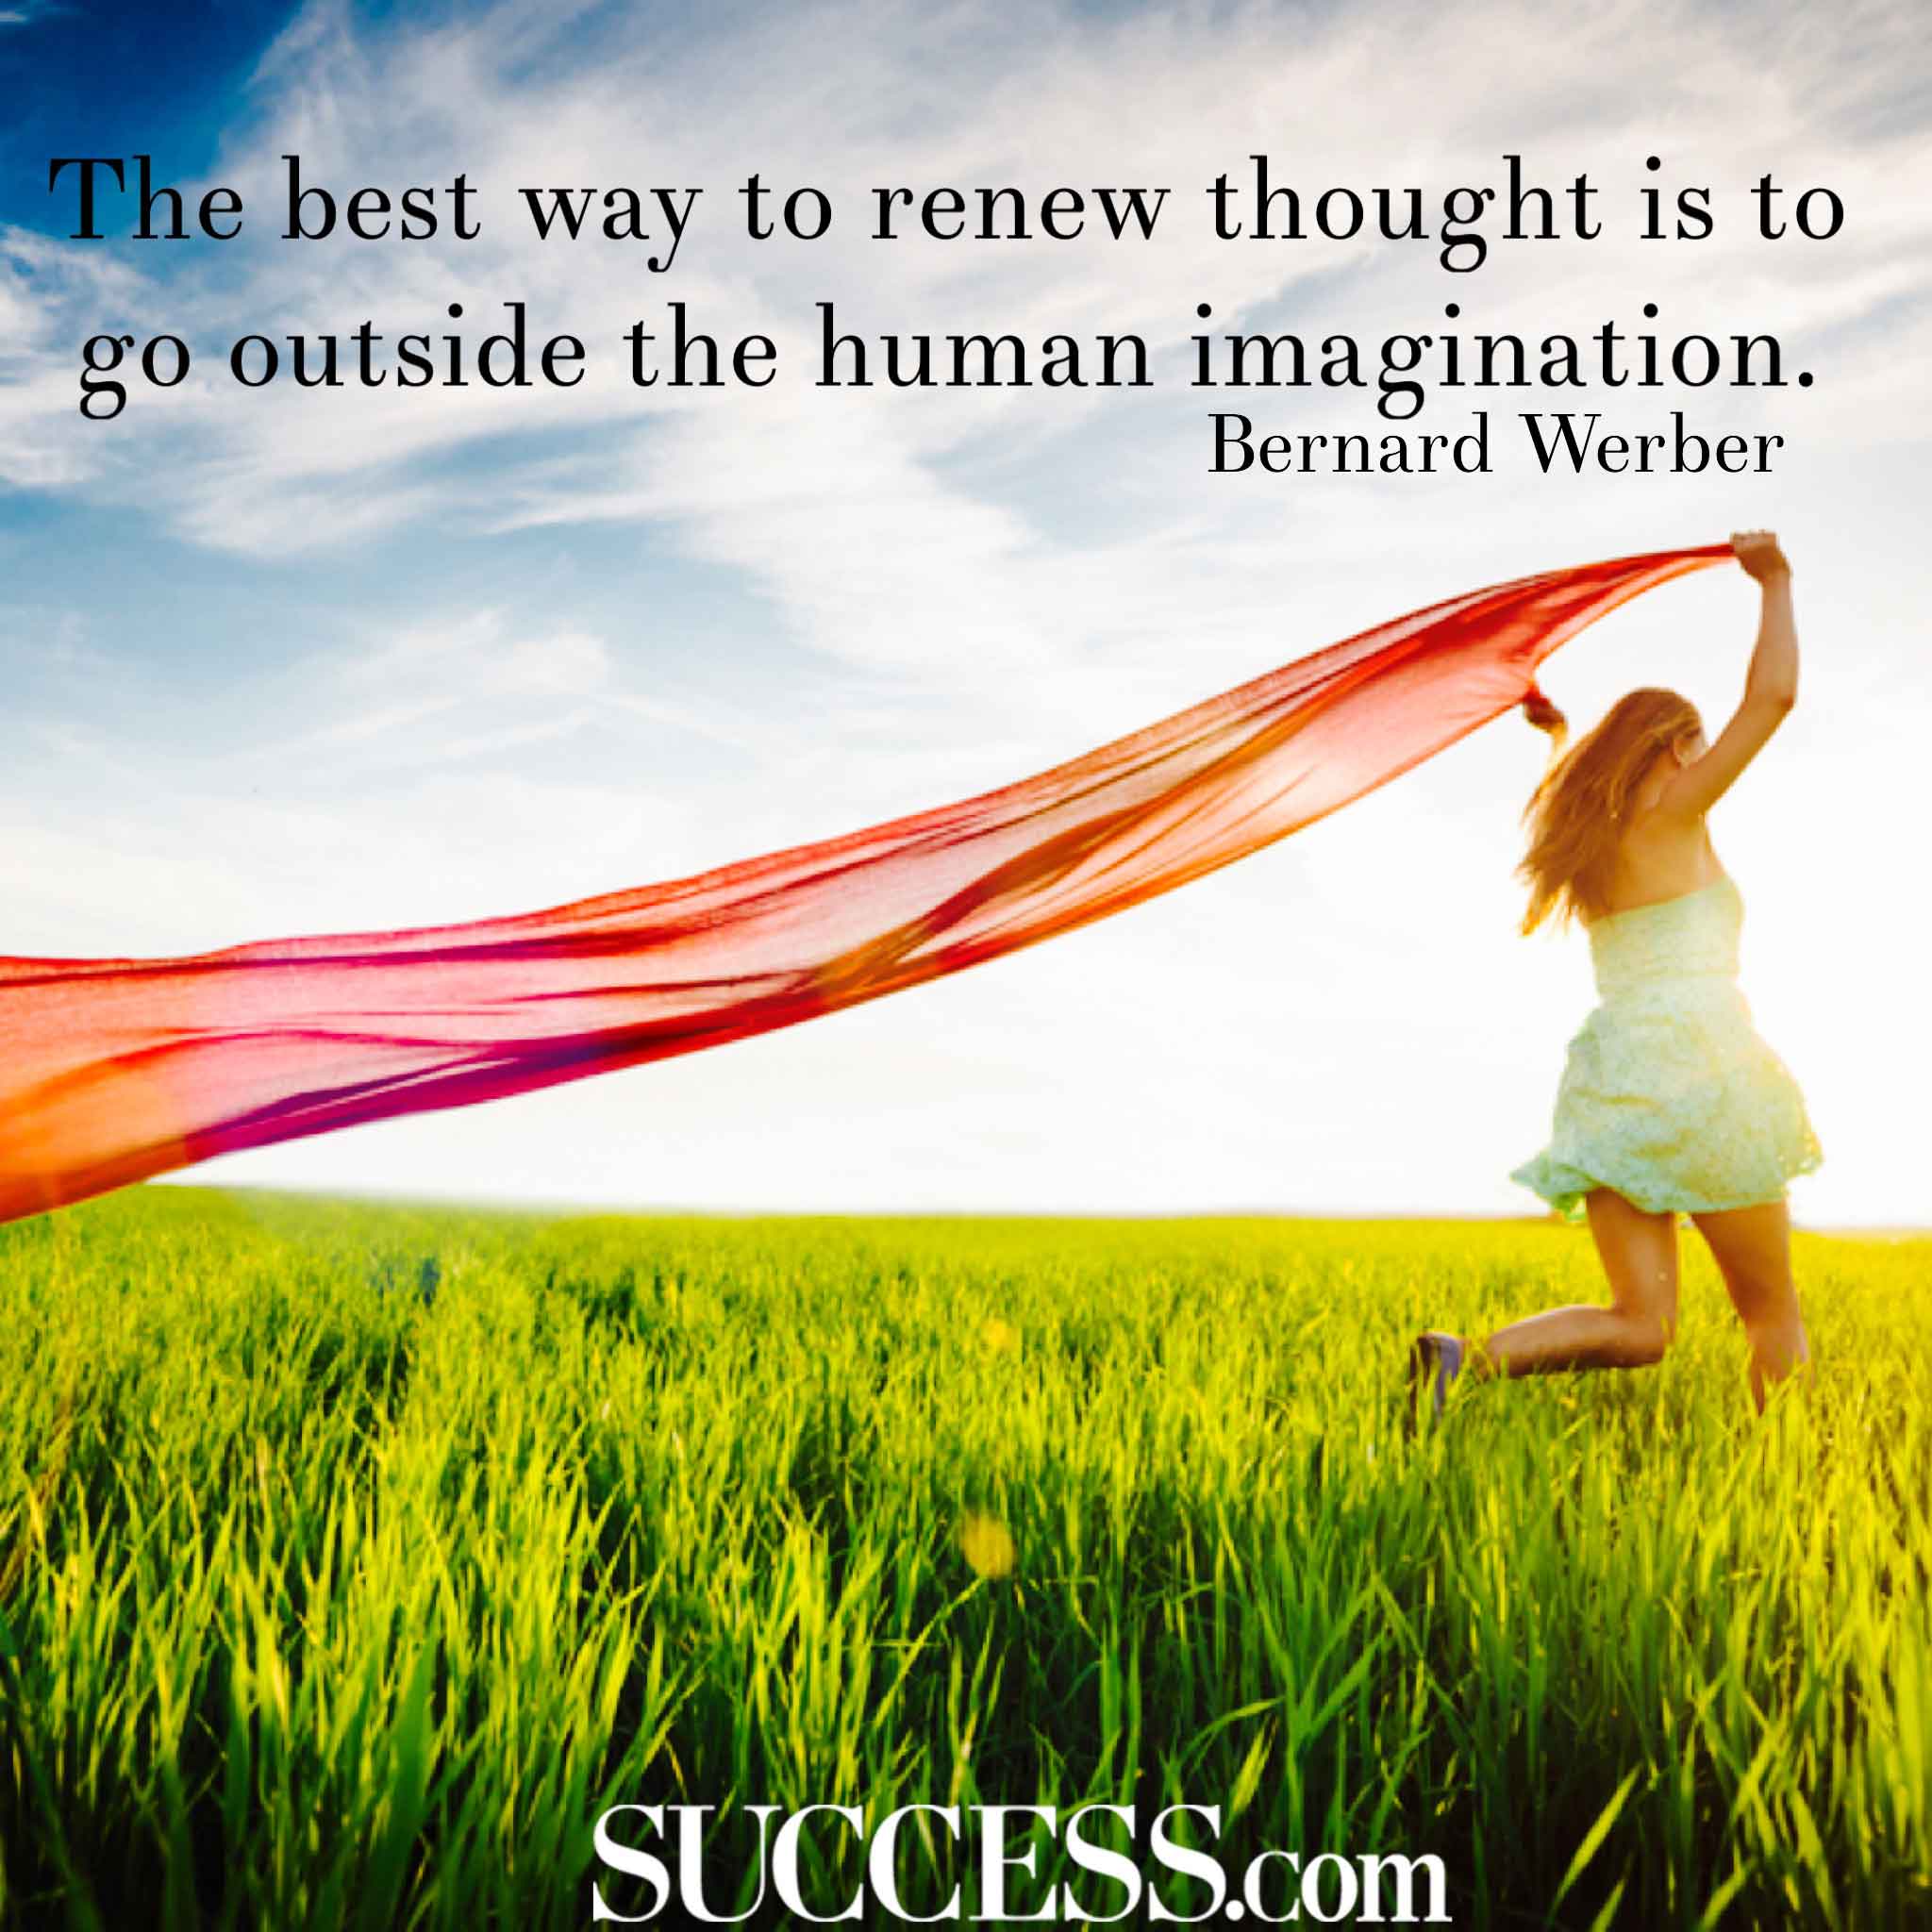 17 Inspirational Quotes to Help you Refocus and Renew